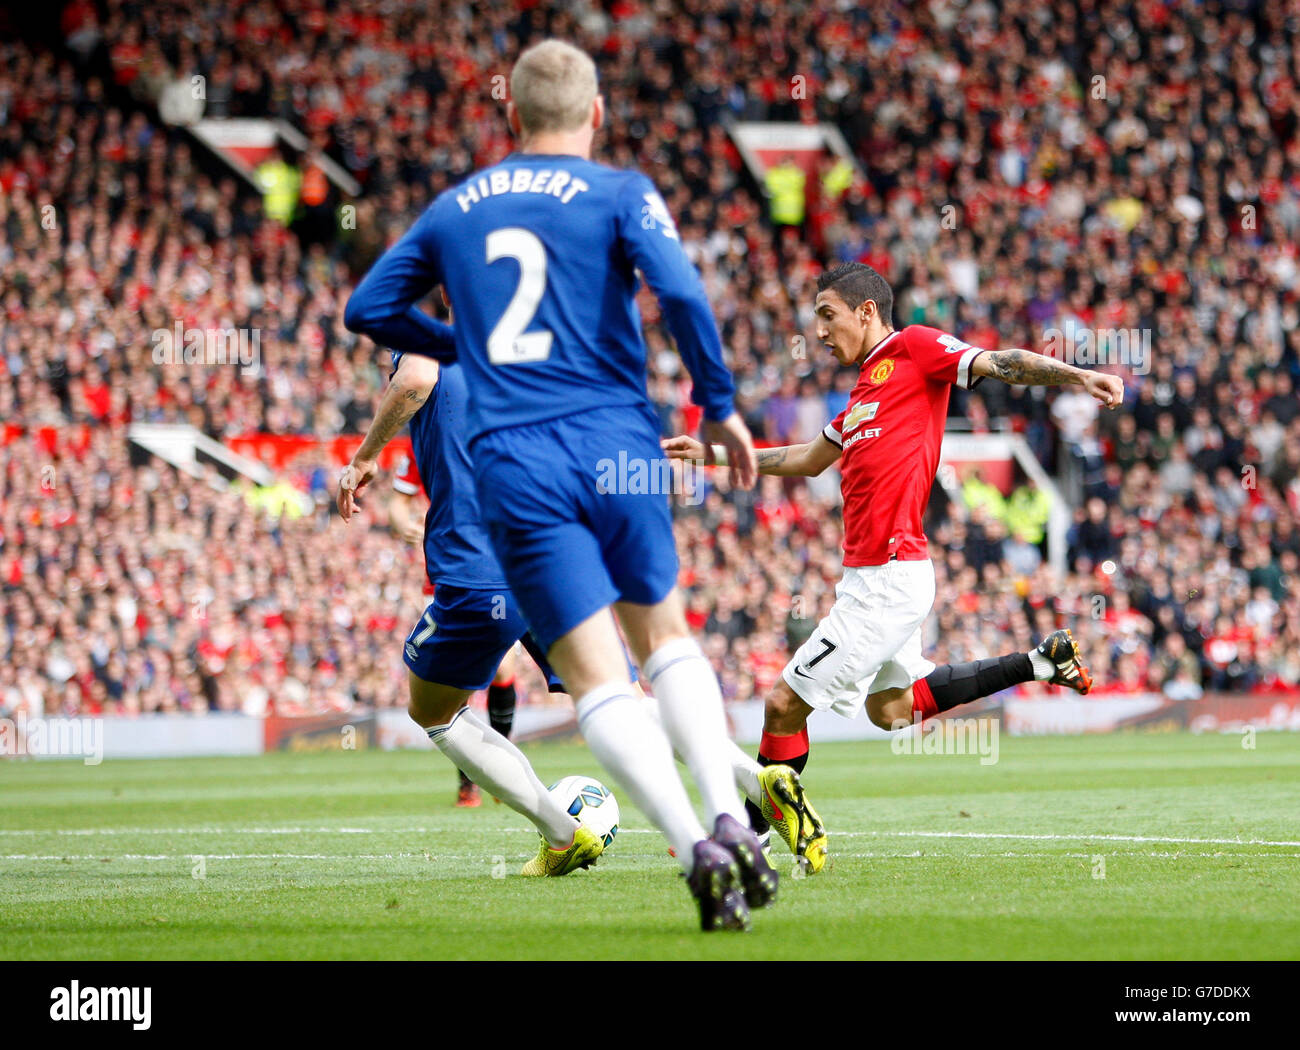 Soccer - Barclays Premier League - Manchester United v Everton - Old Trafford. Manchester United's Angel Di Maria scores his opener Stock Photo